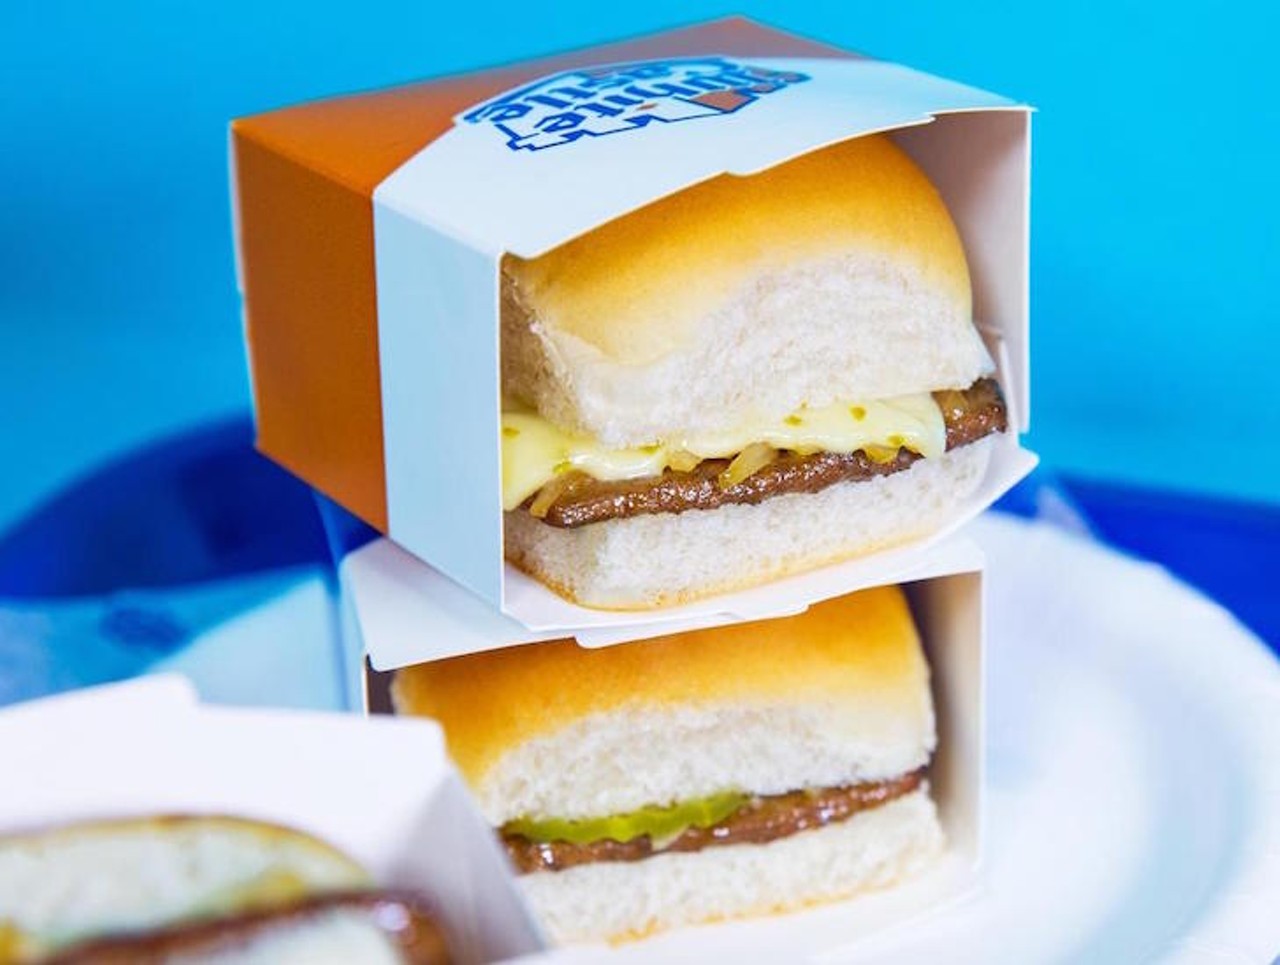 White Castle
The nearest branch of this iconic burger joint resides in Nashville, Tennessee &#151; a short 11 hour drive from the Bay or 1 hour 40 minute flight (but who&#146;s counting?). If your travels have been limited to our fair state, you may still be familiar with White Castle from the franchise&#146;s freezer section sliders. Of course, any true connoisseur of fast food will tell you that this tasty little patty&#146;s are best served straight off the flat-top.
Photo via Shake Shack/Facebook